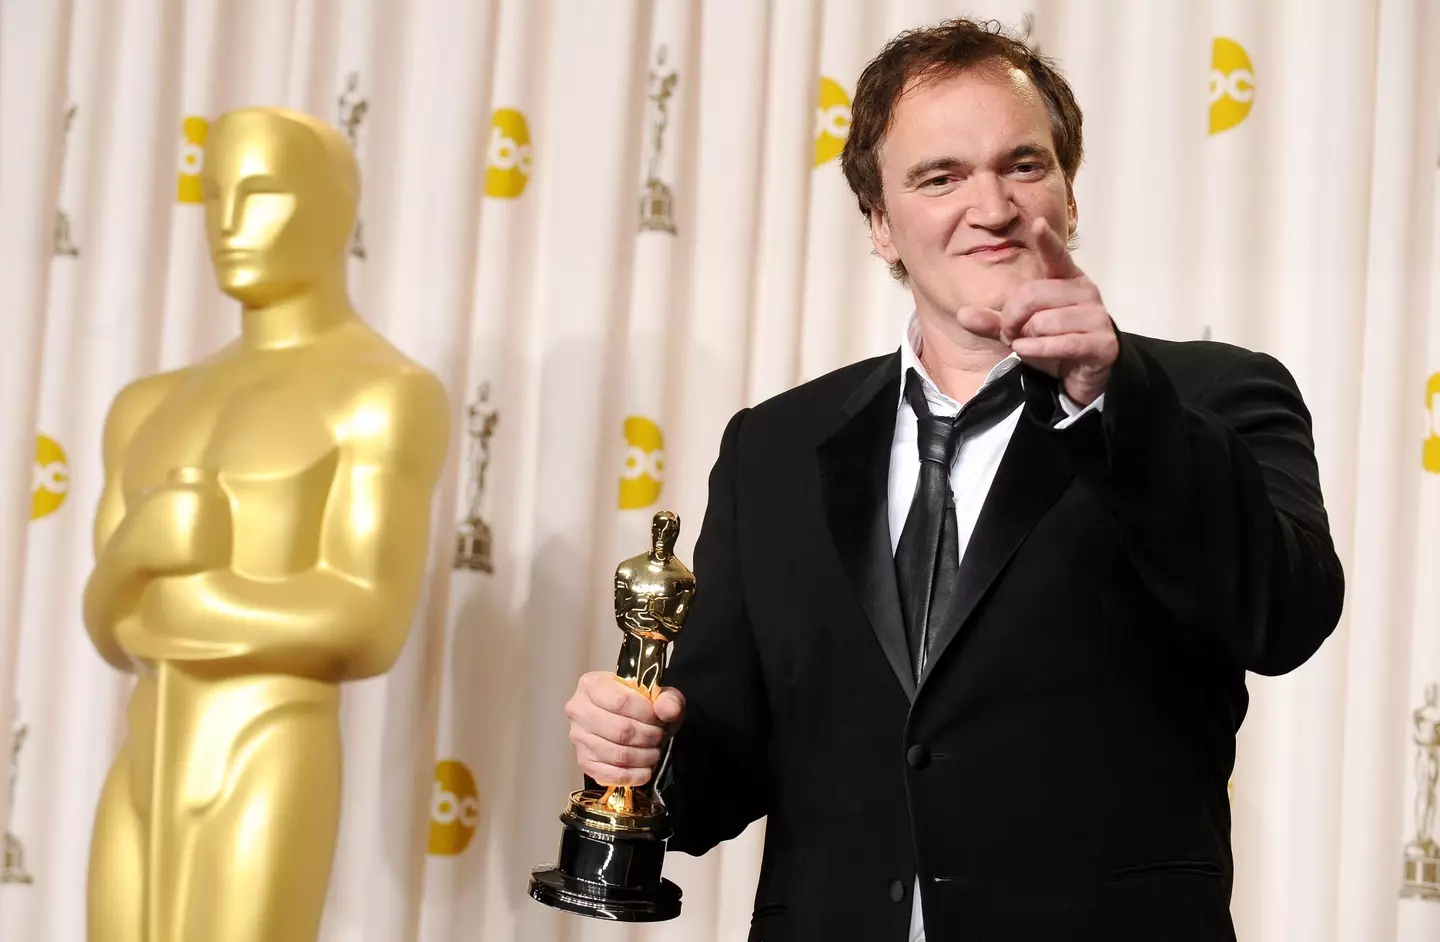 For his 10th and final film Quentin Tarantino is going to cook up something original for audiences.